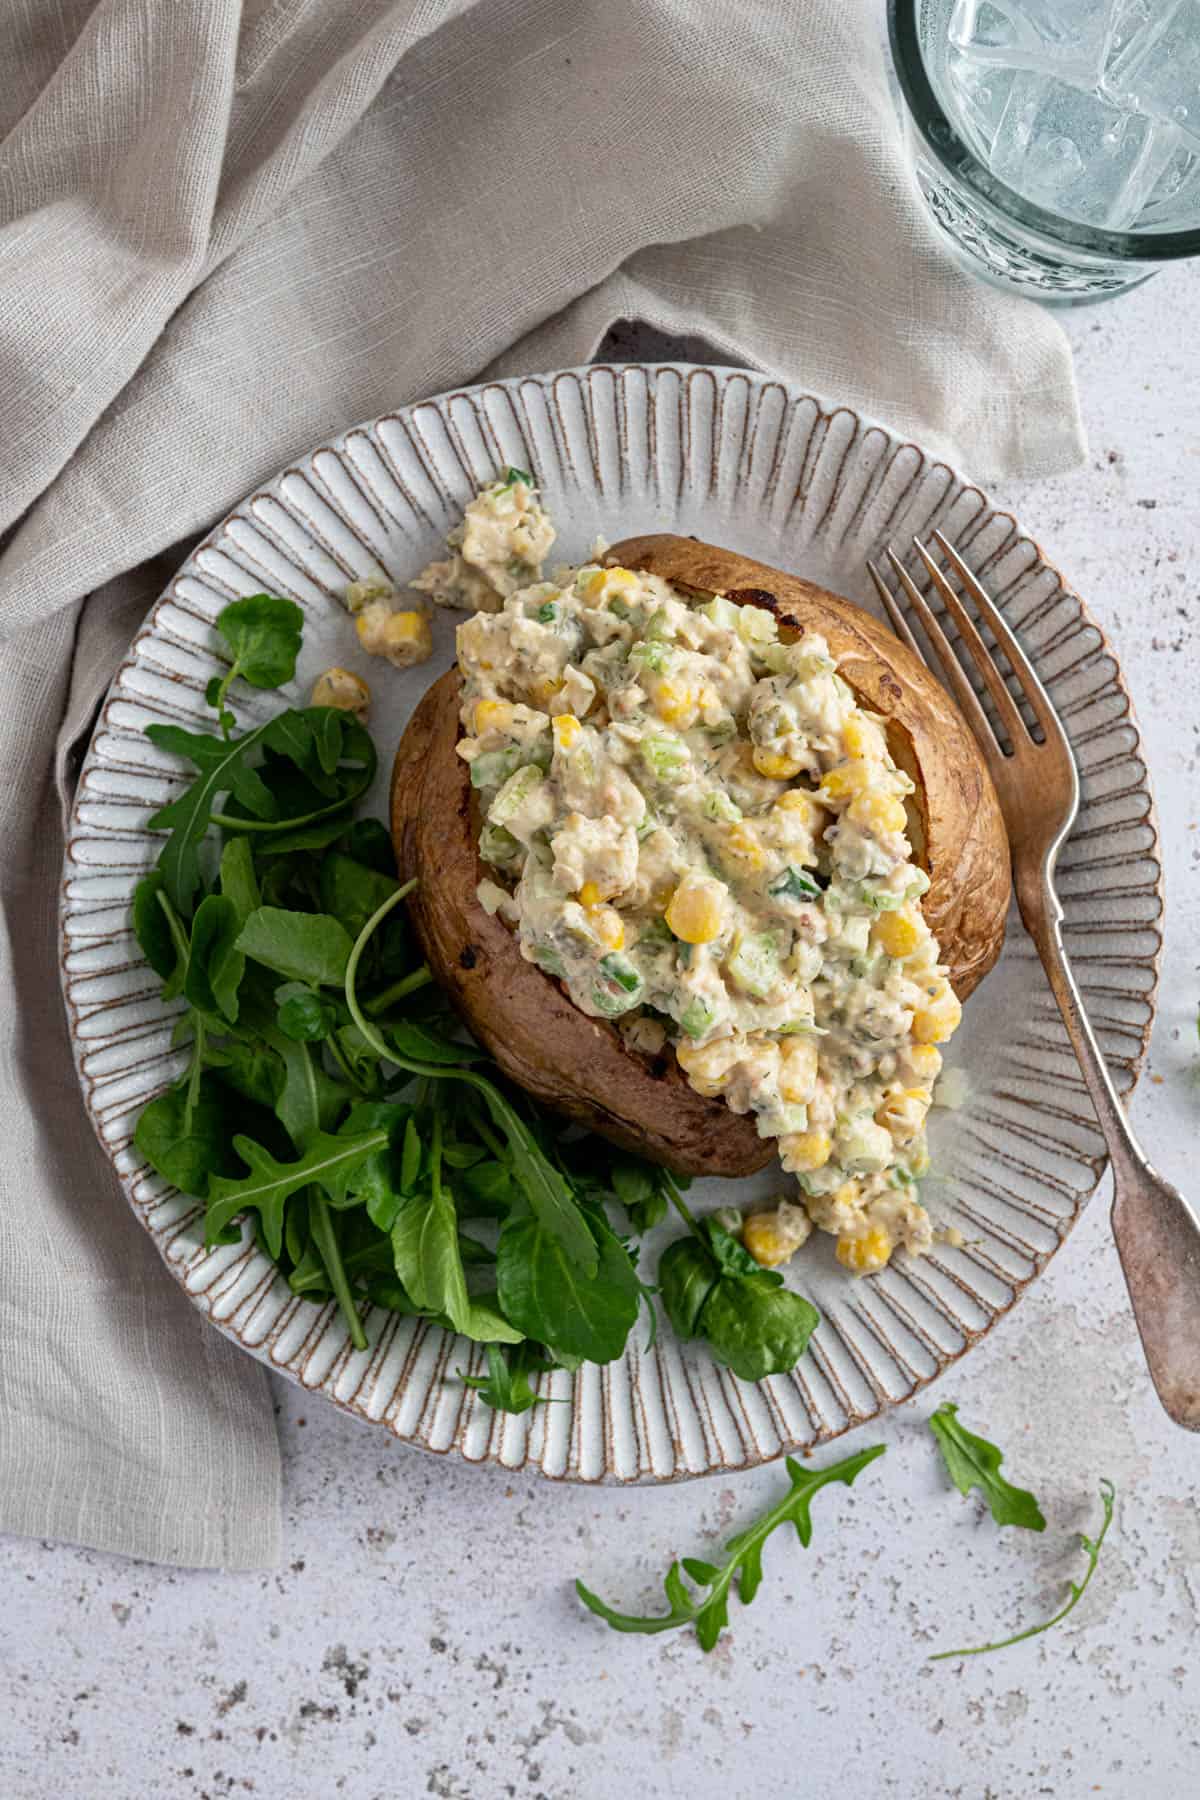 A baked potato with chickpea mayo salad and some green salad on the side.